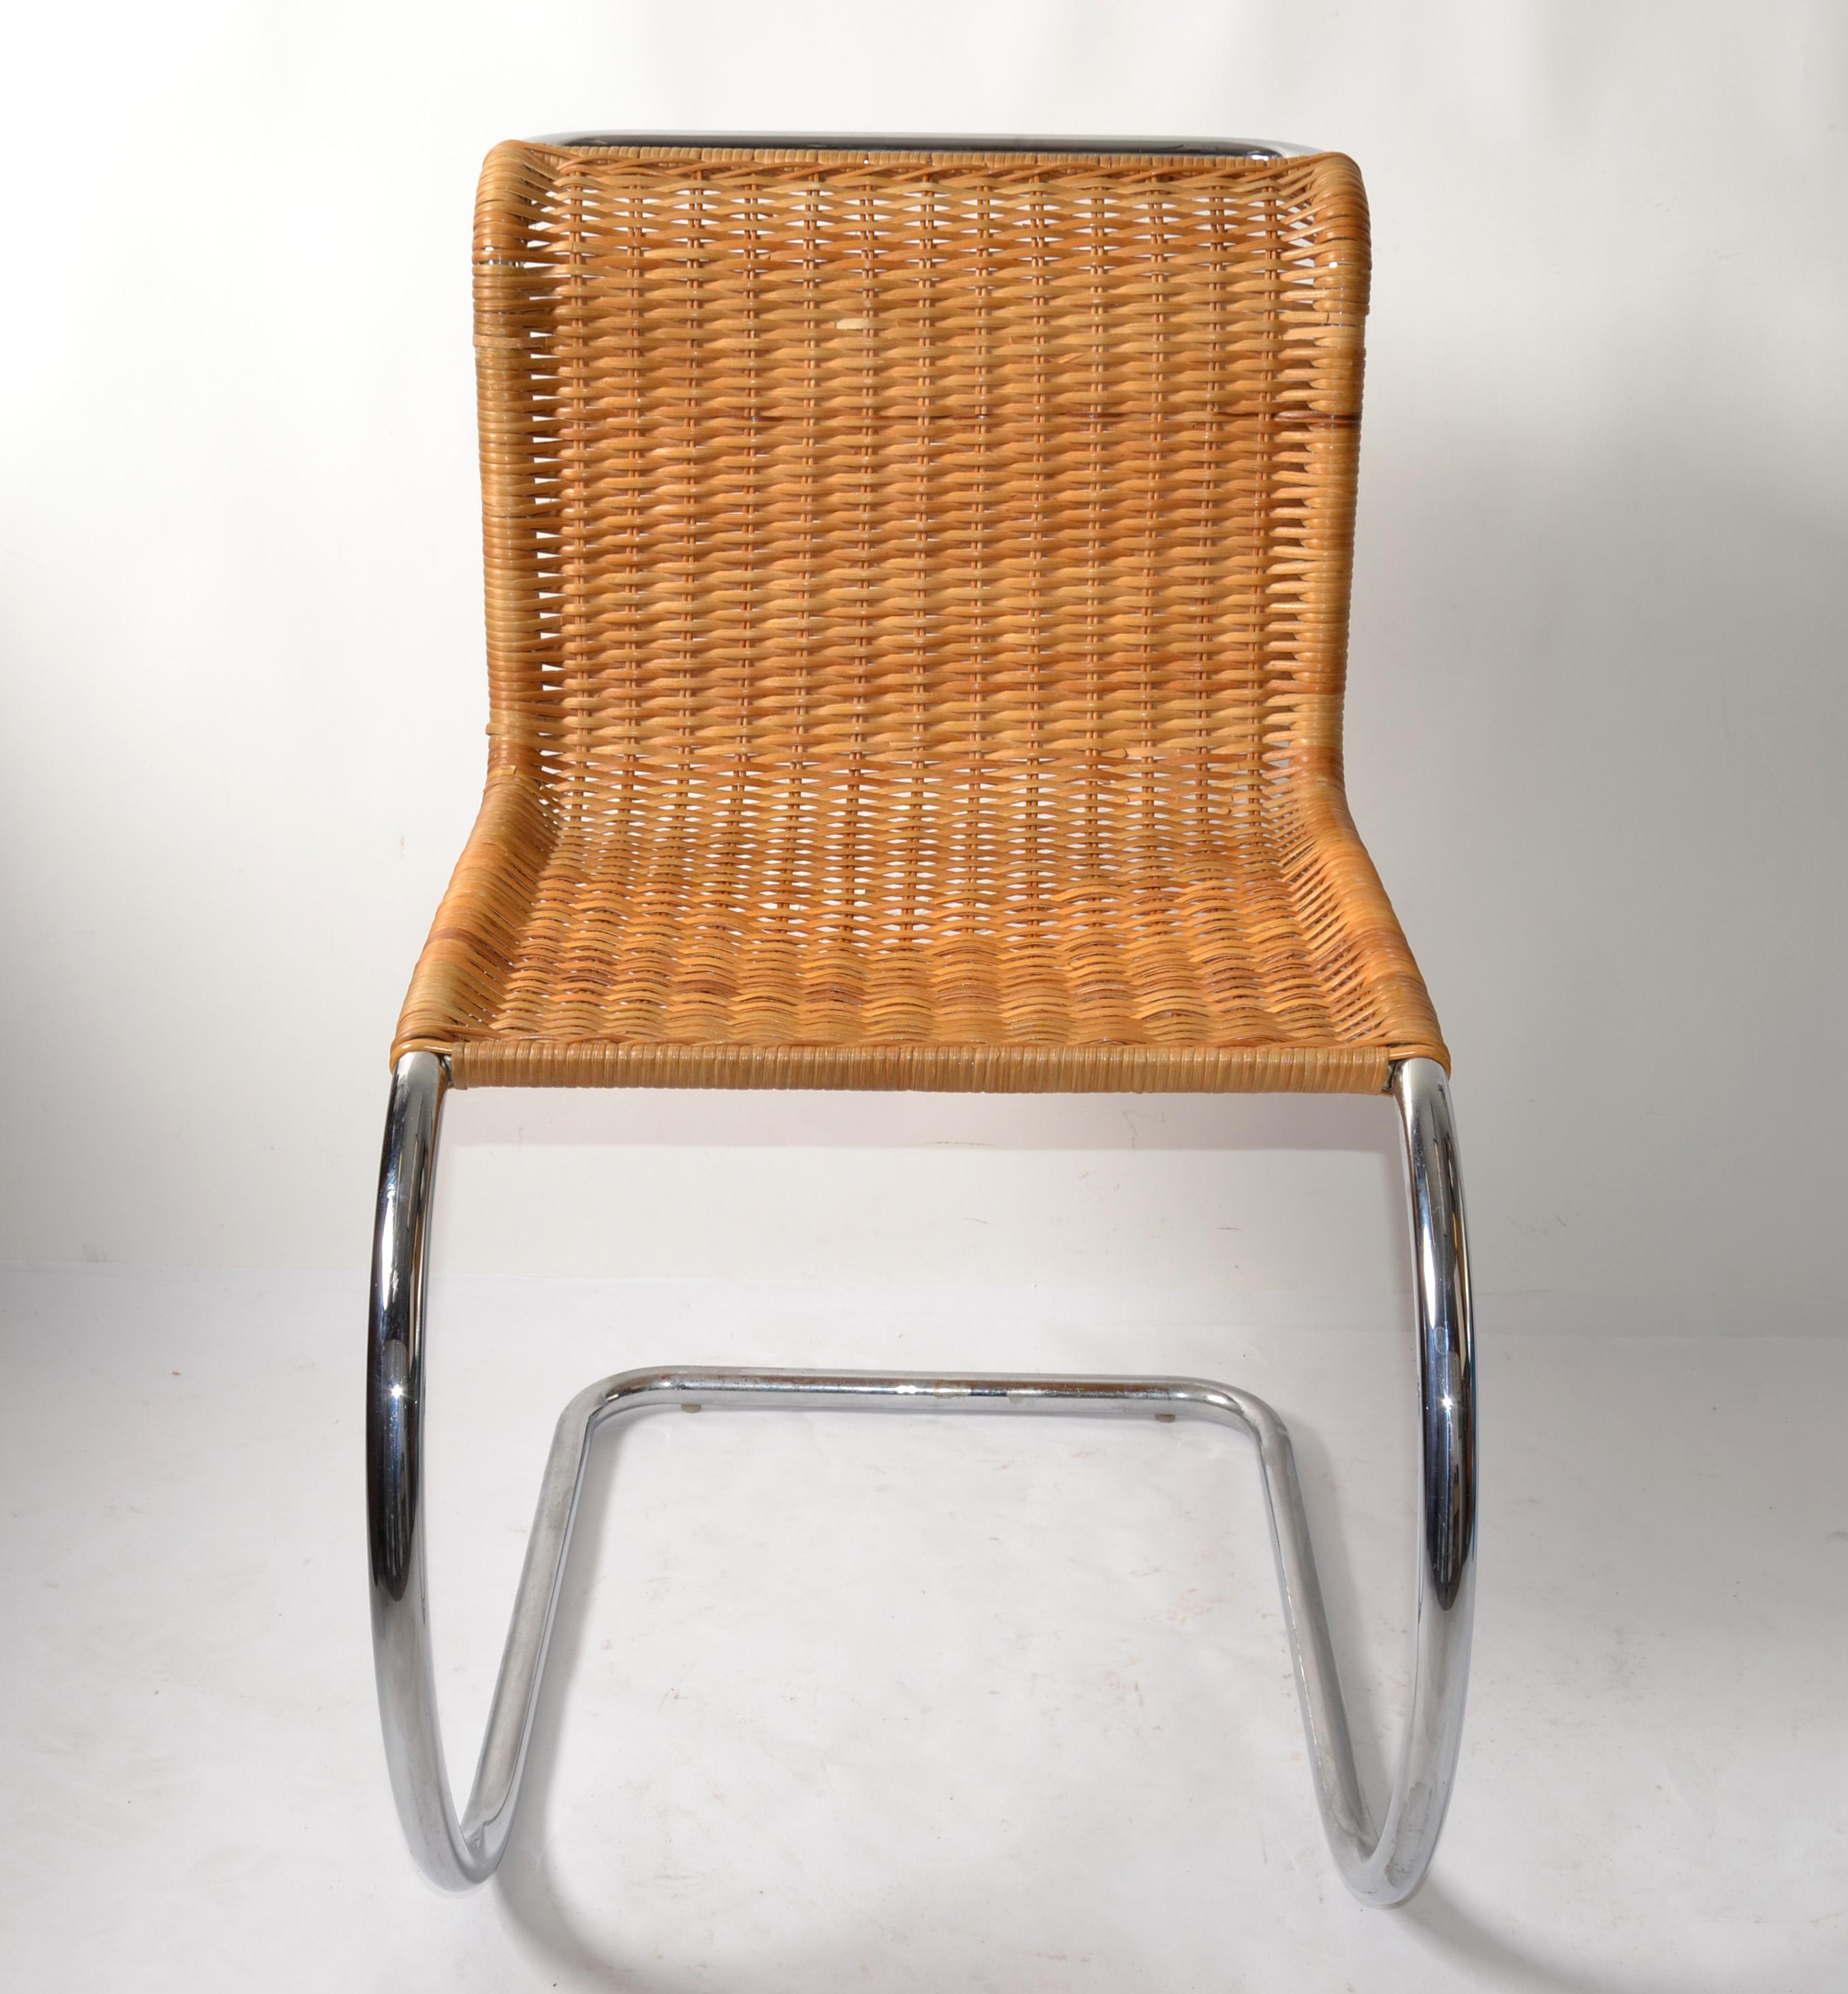 Tubular Ludwig Mies van der Rohe Attributed Mr Chair Armless Woven Cane Seat 70s In Good Condition For Sale In Miami, FL